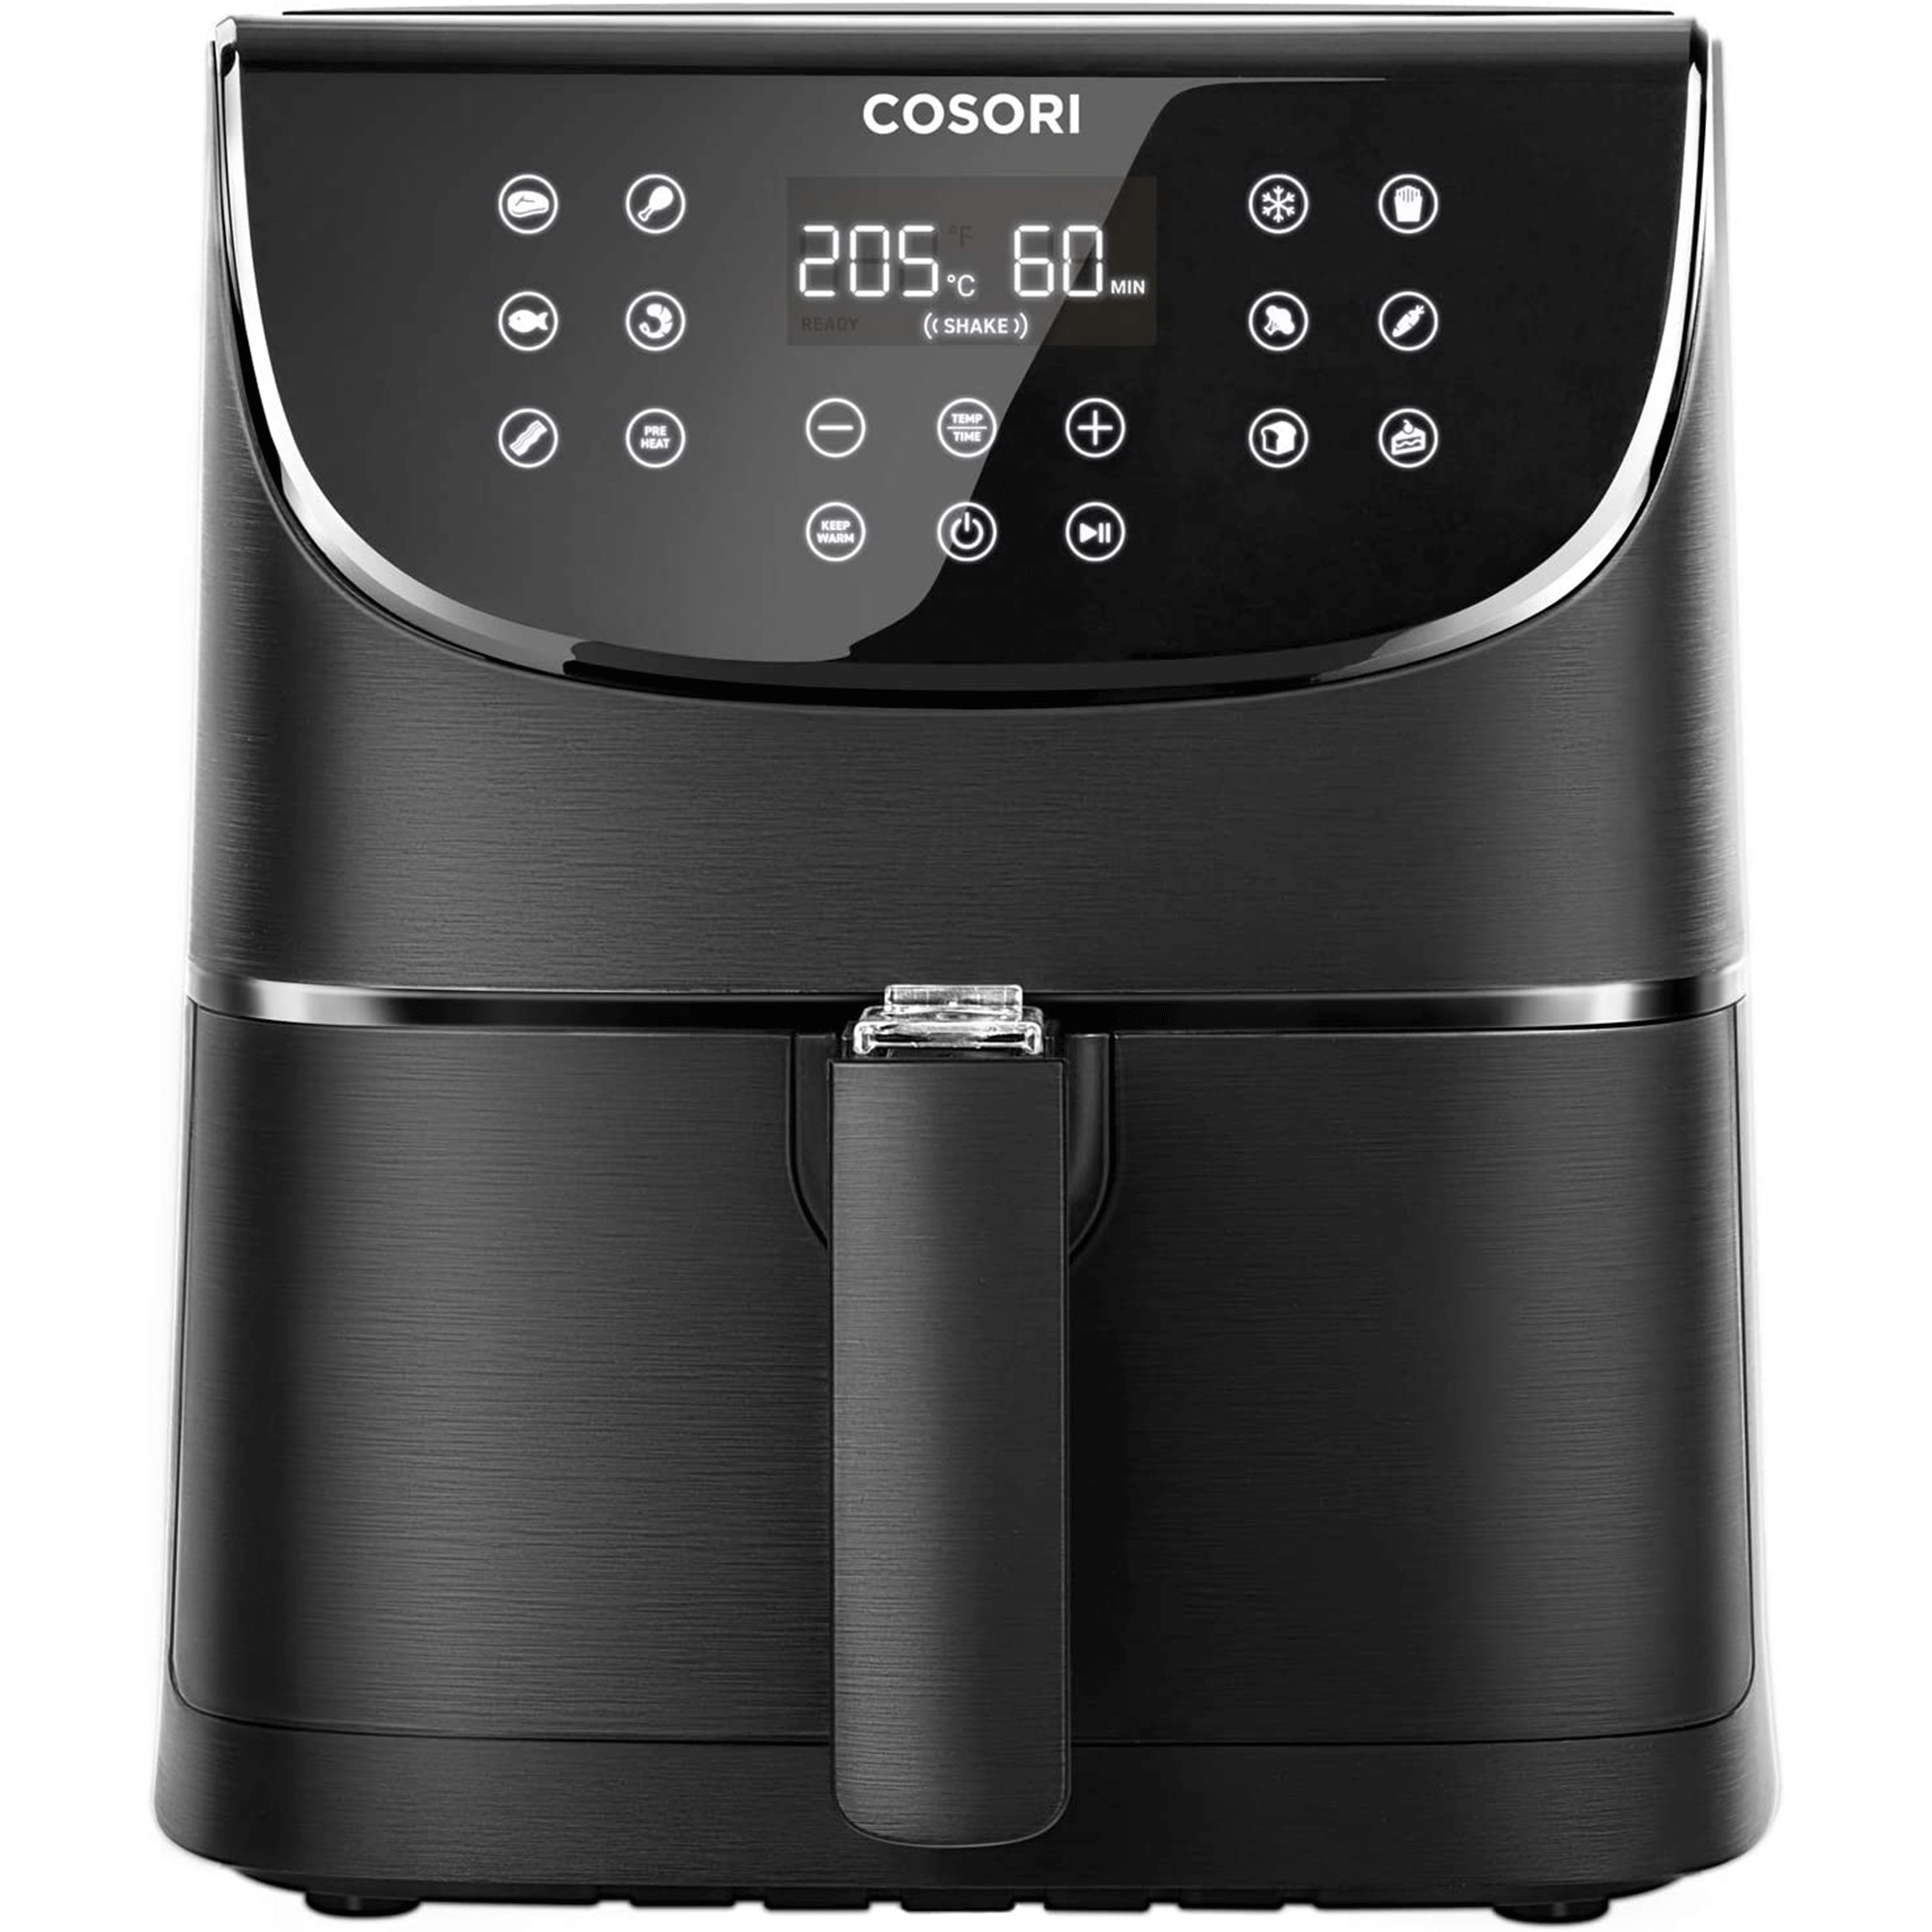 Cosori air fryer for recall